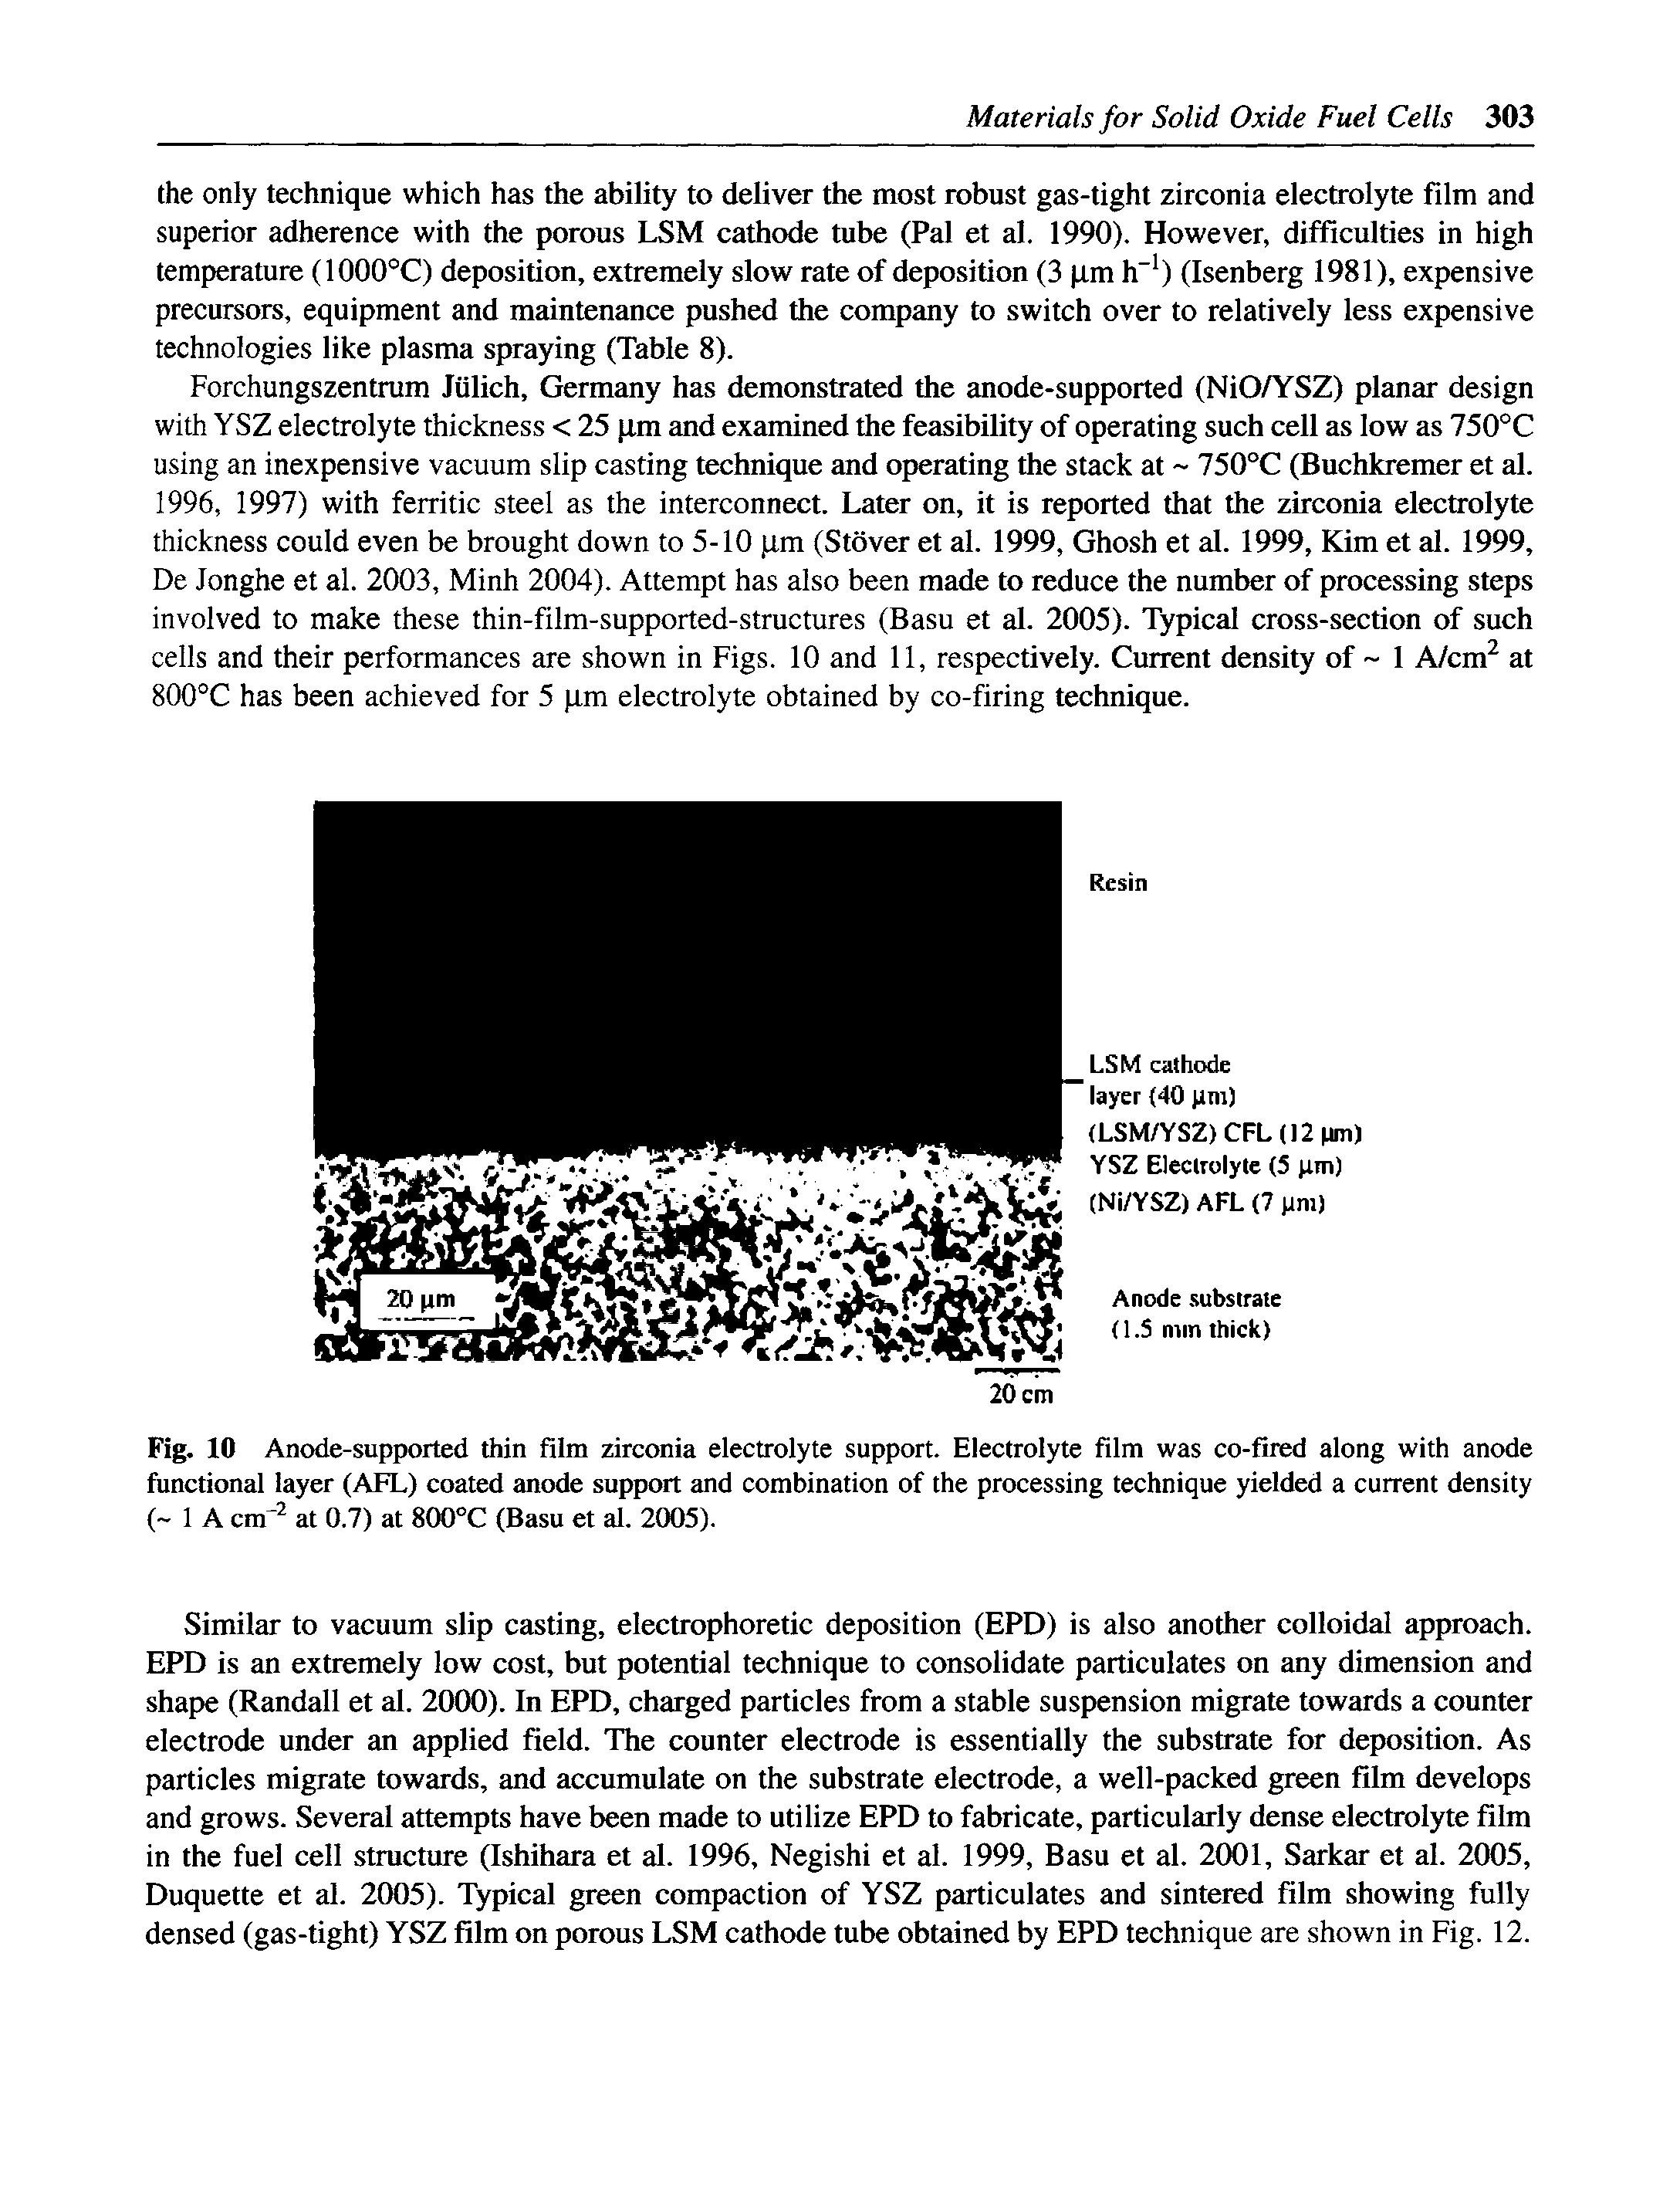 Fig. 10 Anode-supported thin film zirconia electrolyte support. Electrolyte film was co-fired along with anode functional layer (AFL) coated anode support and combination of the processing technique )delded a current density ( 1 A cm at 0.7) at 800°C (Basu et al. 2005).